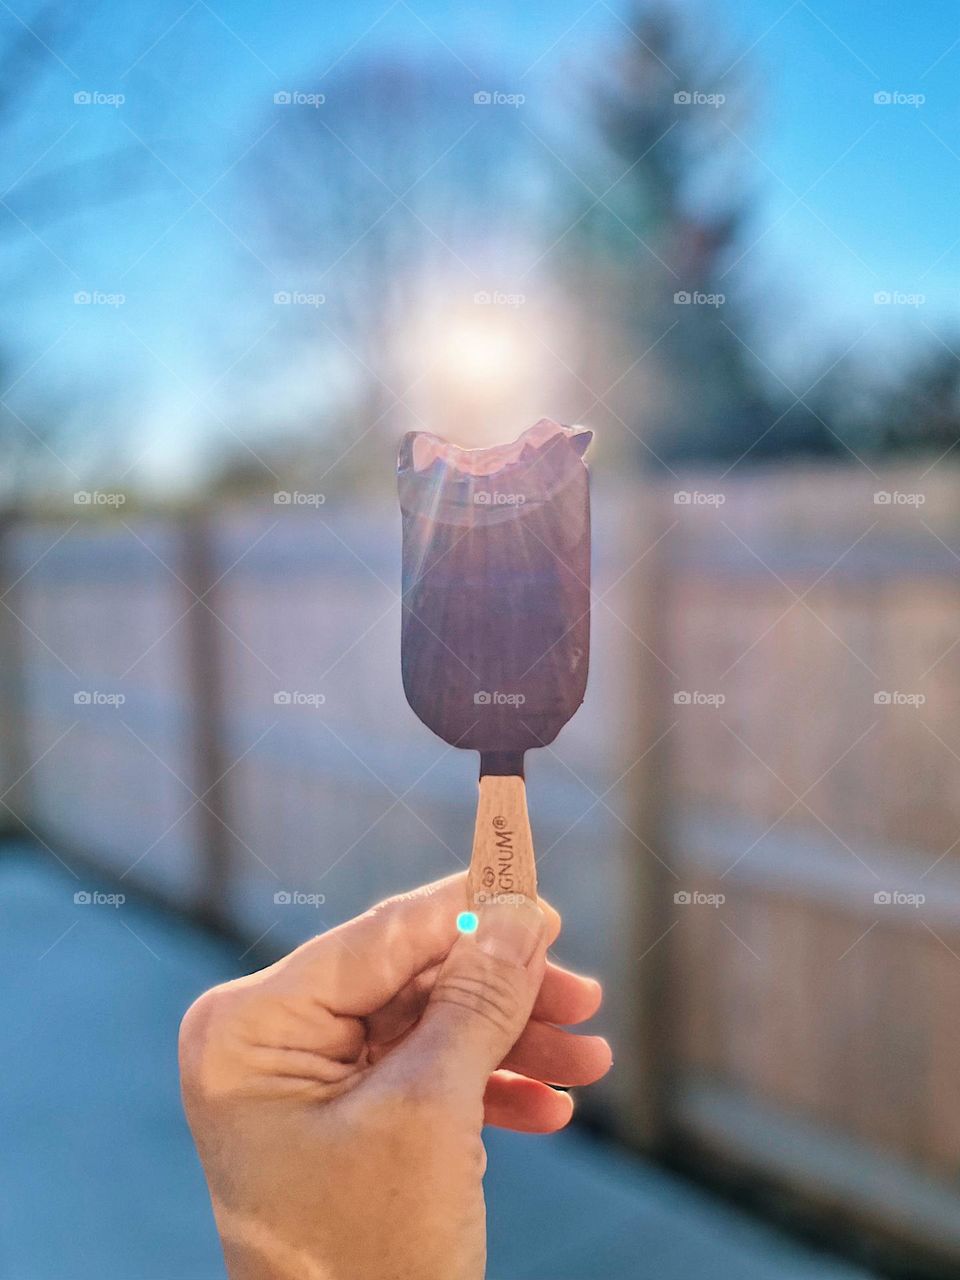 Eating an ice cream bar in the sun, woman’s hand holding a Magnum Ice Cream bar, eating a Magnum ice cream bar, smartphone food photography, delicious desserts eaten outside, sunshine coming through bite on ice cream bar, Magnum ice cream brand